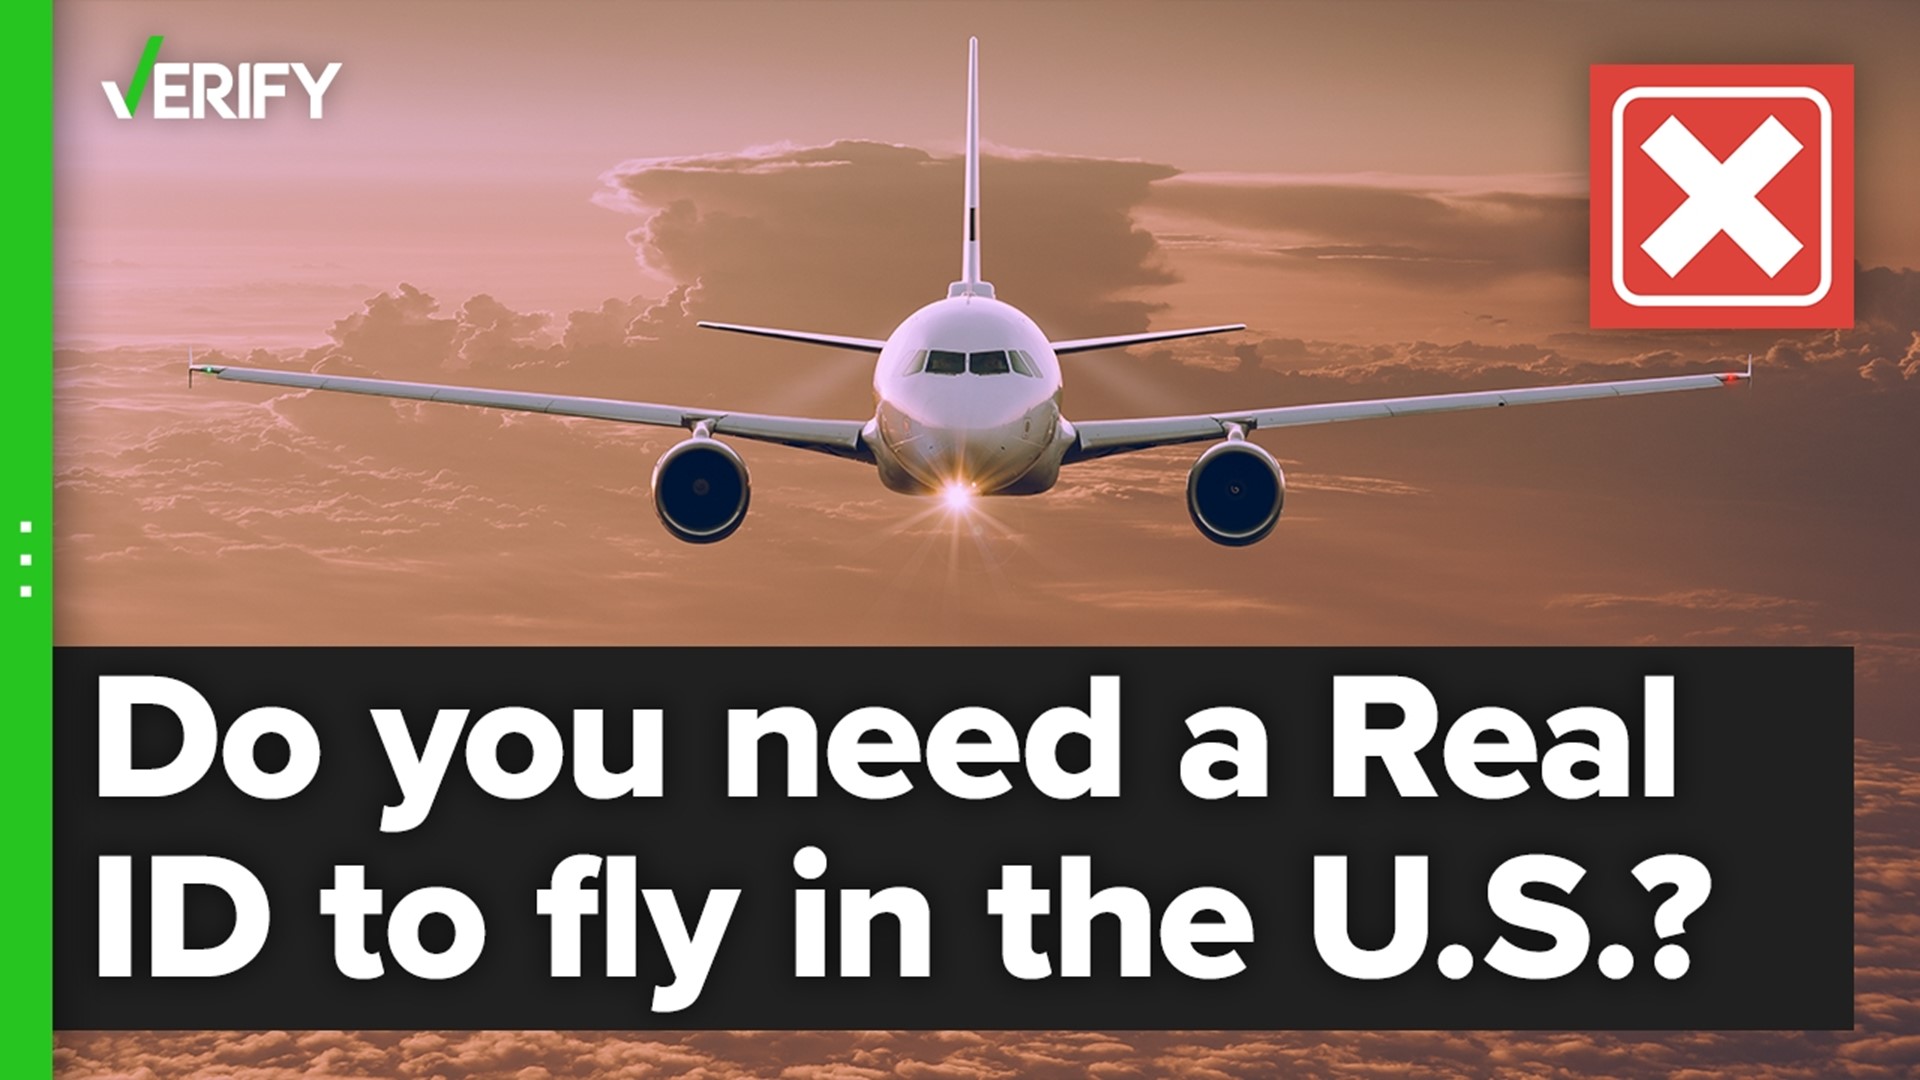 In 2021 DHS said only 43% of driver’s licenses were REAL IDs. If you want to use your license to fly in the U.S. after May 2025, it will need to be a REAL ID.